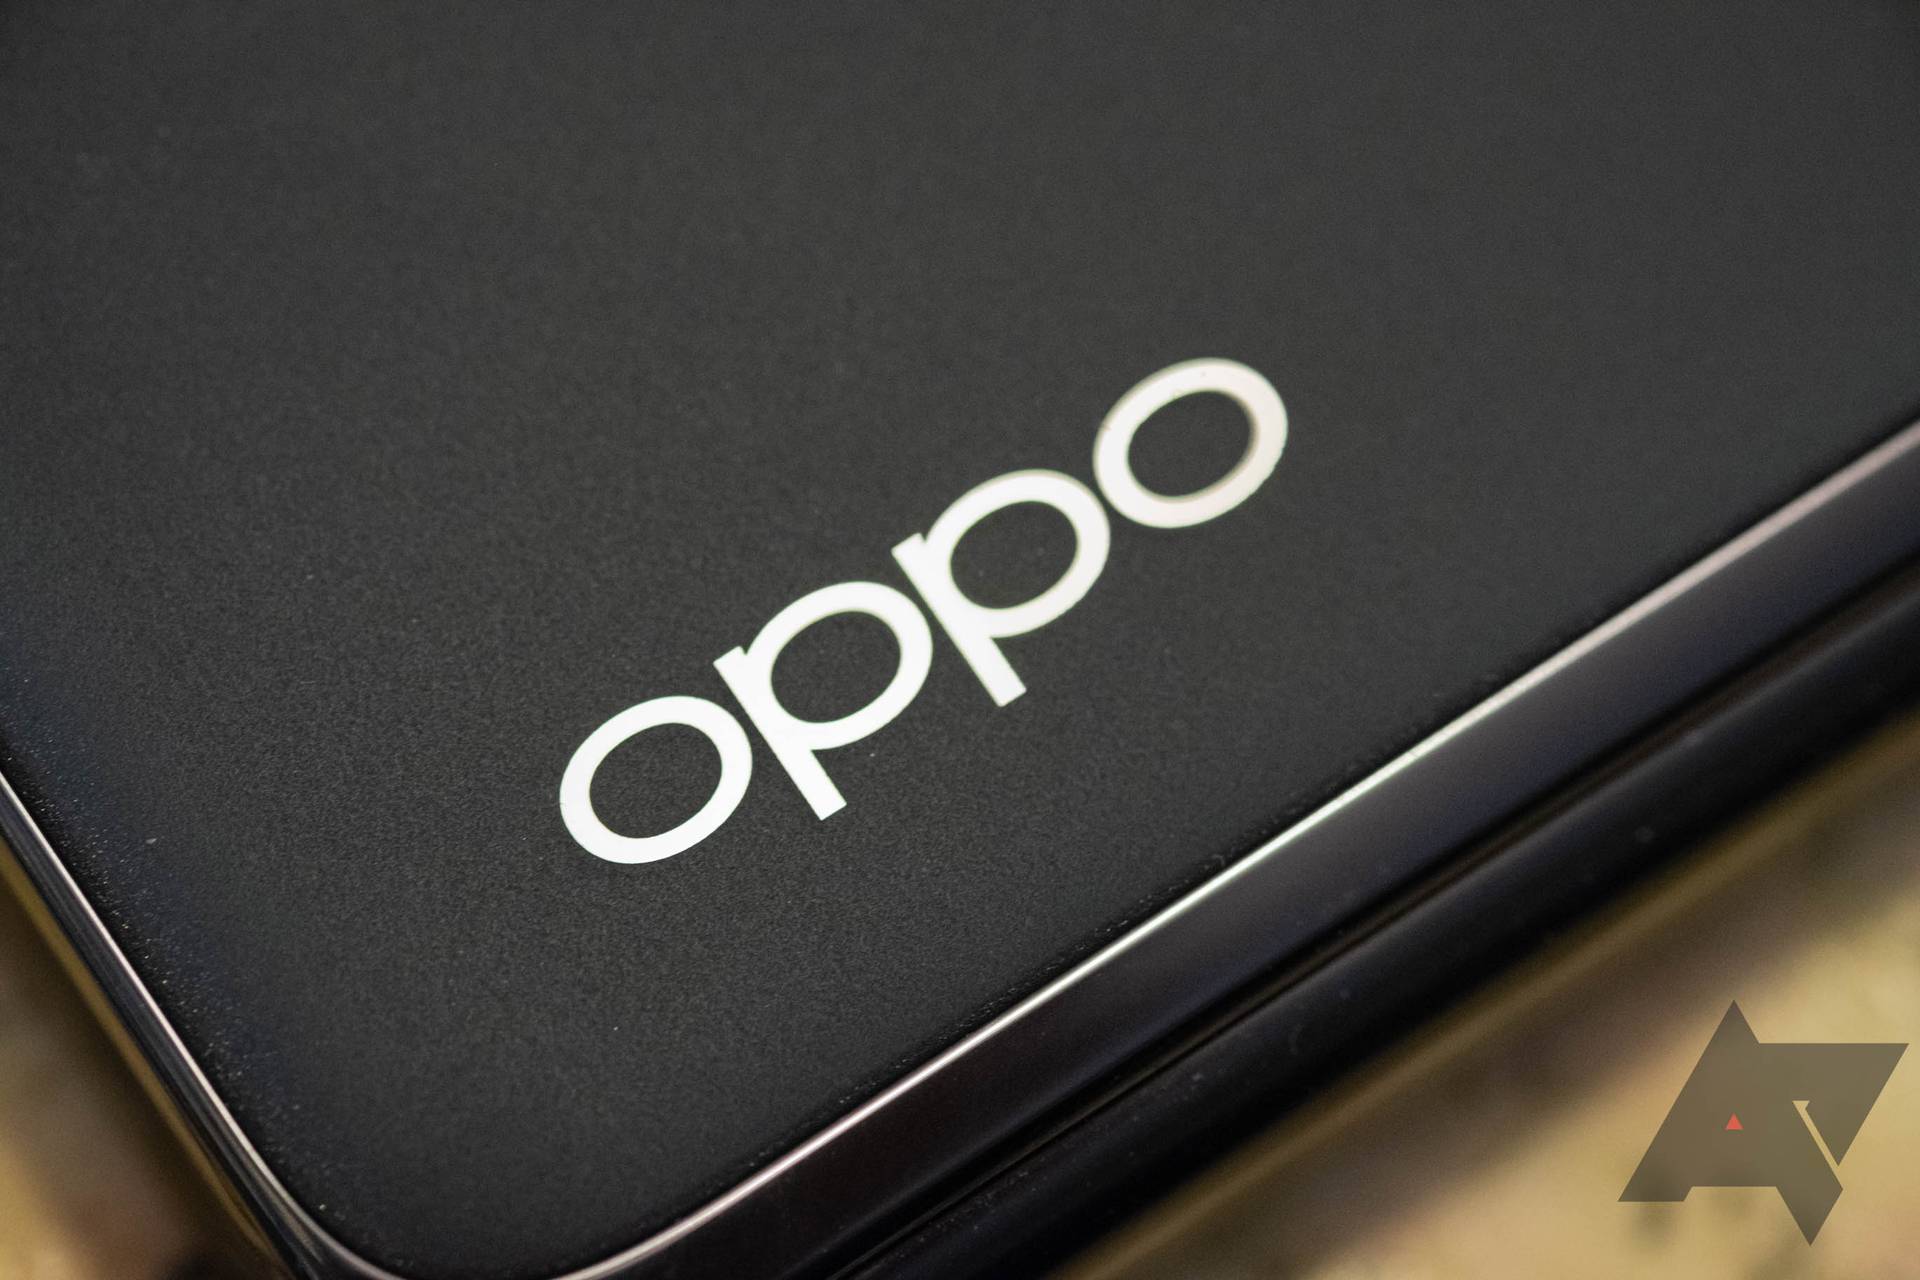 Oppo phones could be running the company's own custom SoC in as little as two years